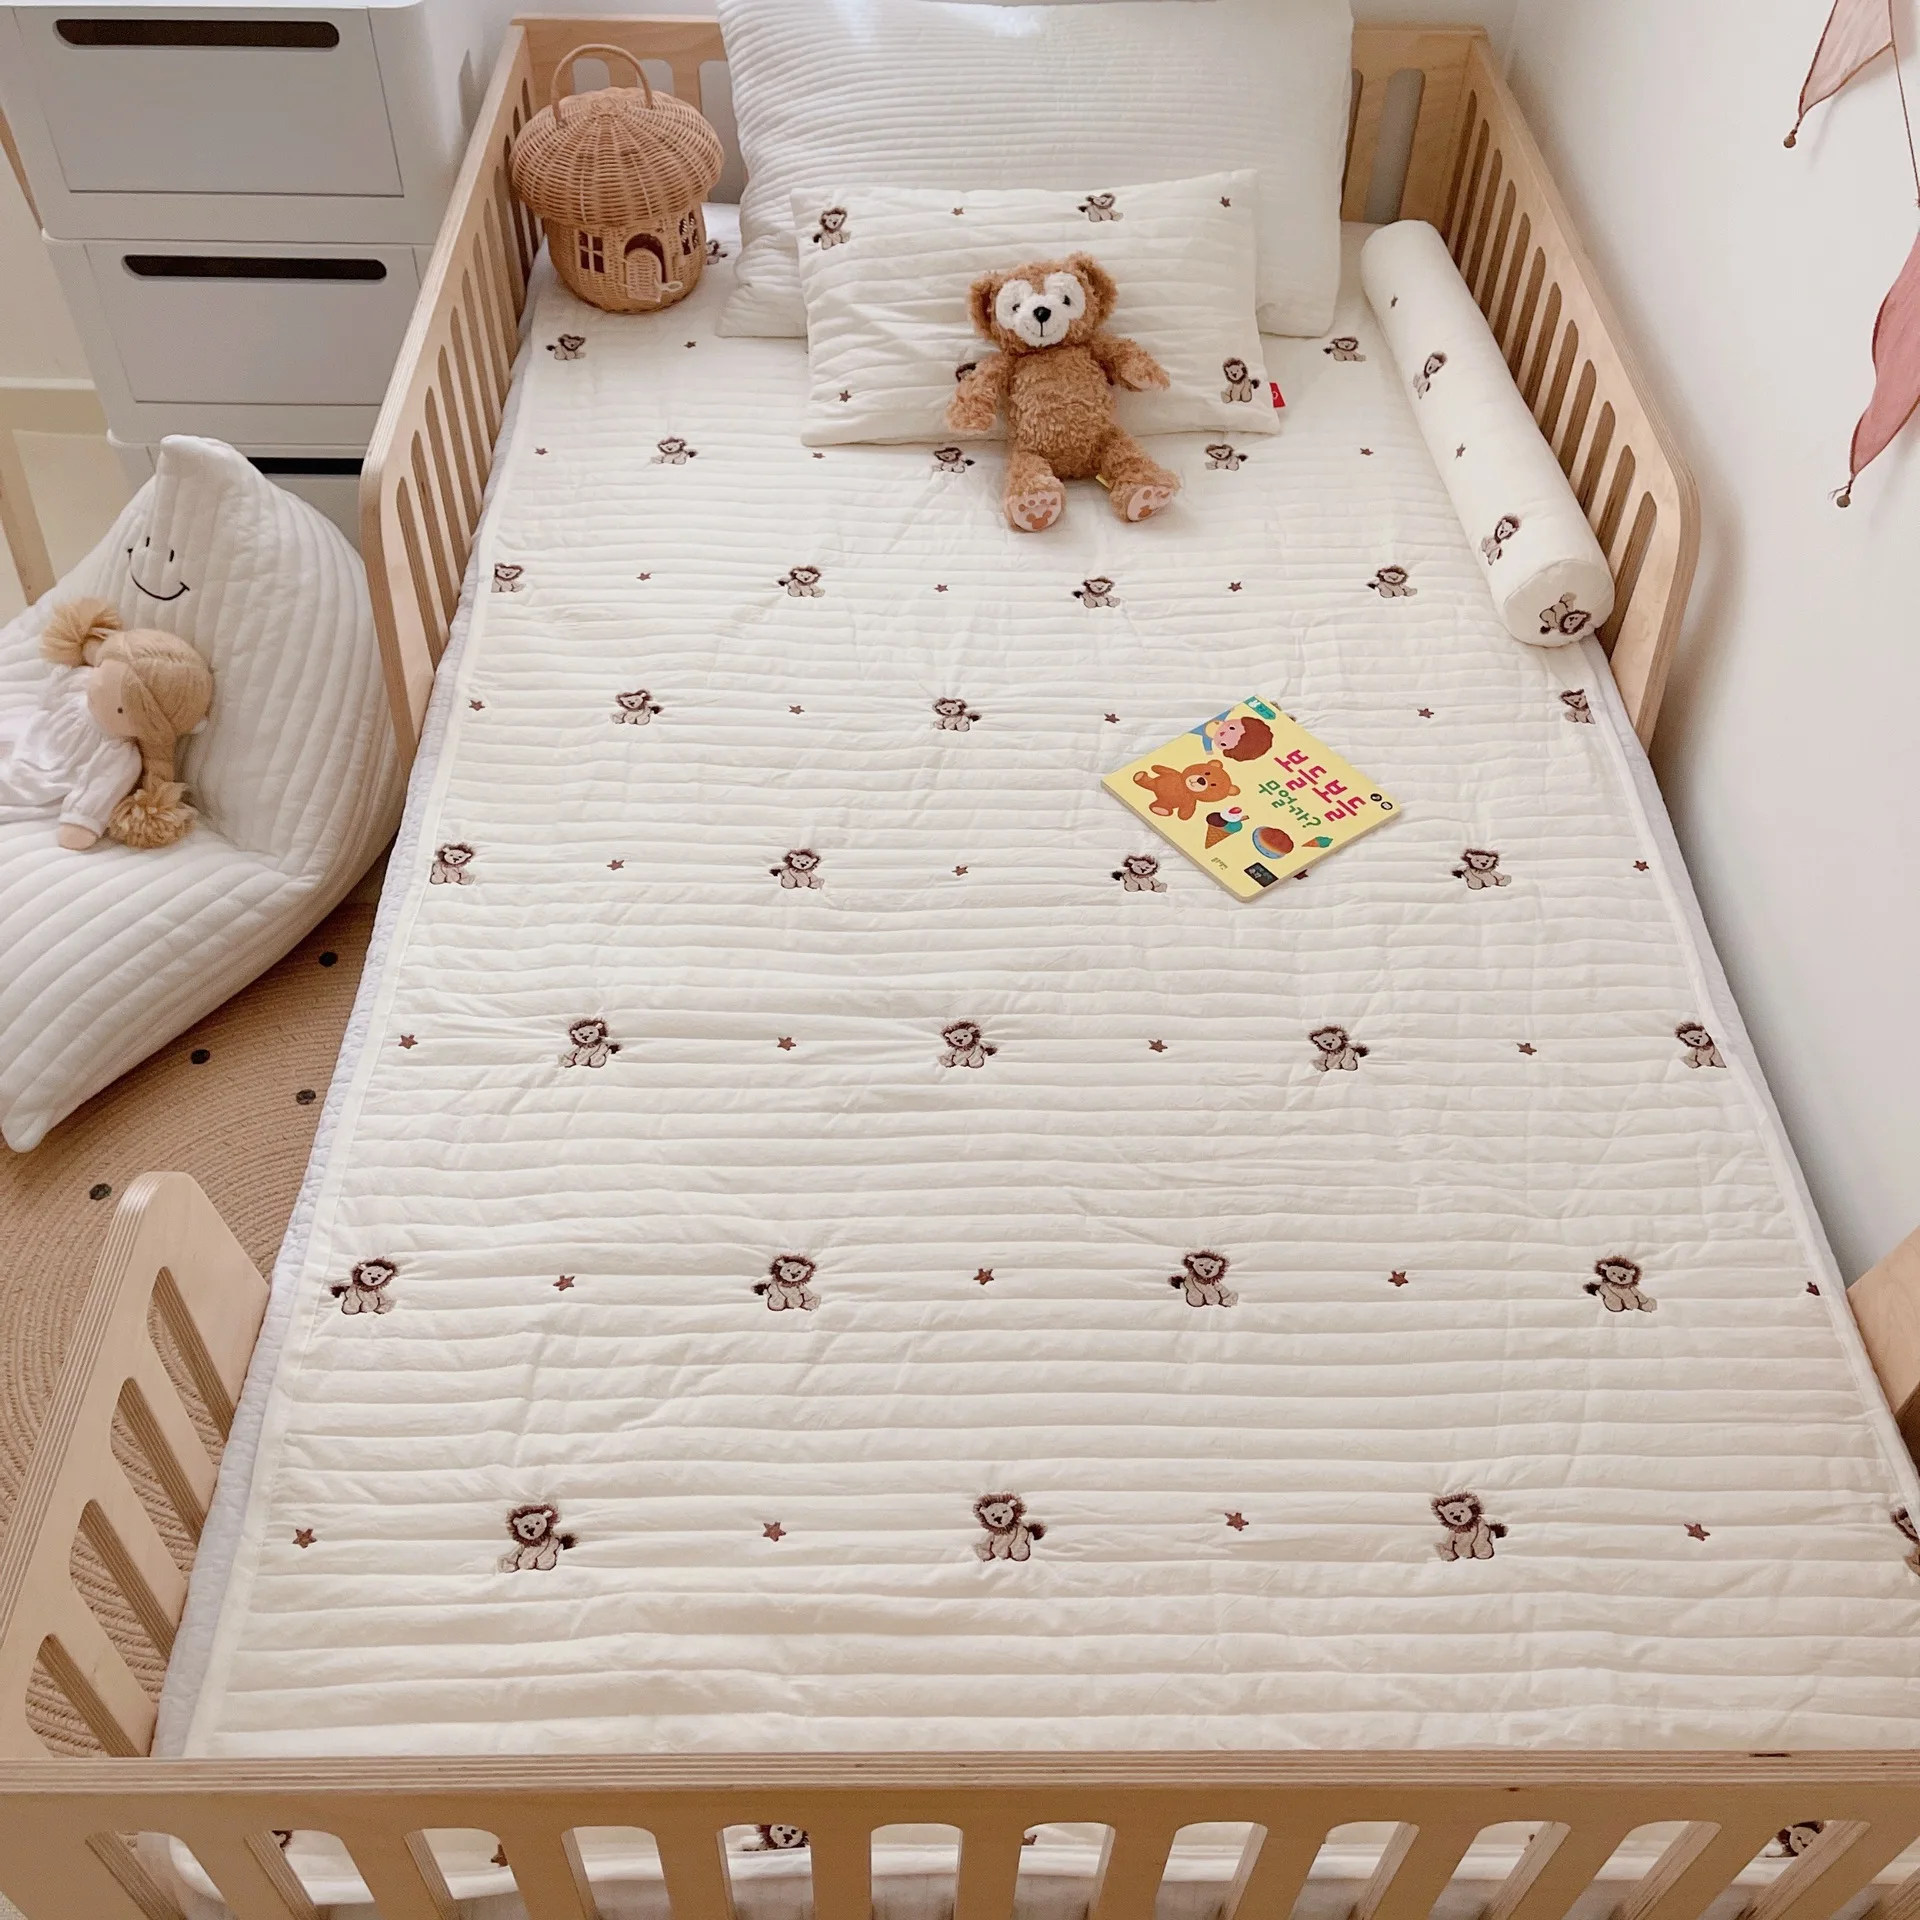 

Korean Baby Quilted Sheet for Baby Cot Crib Sheets Cotton Lion Embroidered Kids Children Infant Bed Linen Baby Bedding Bedcover